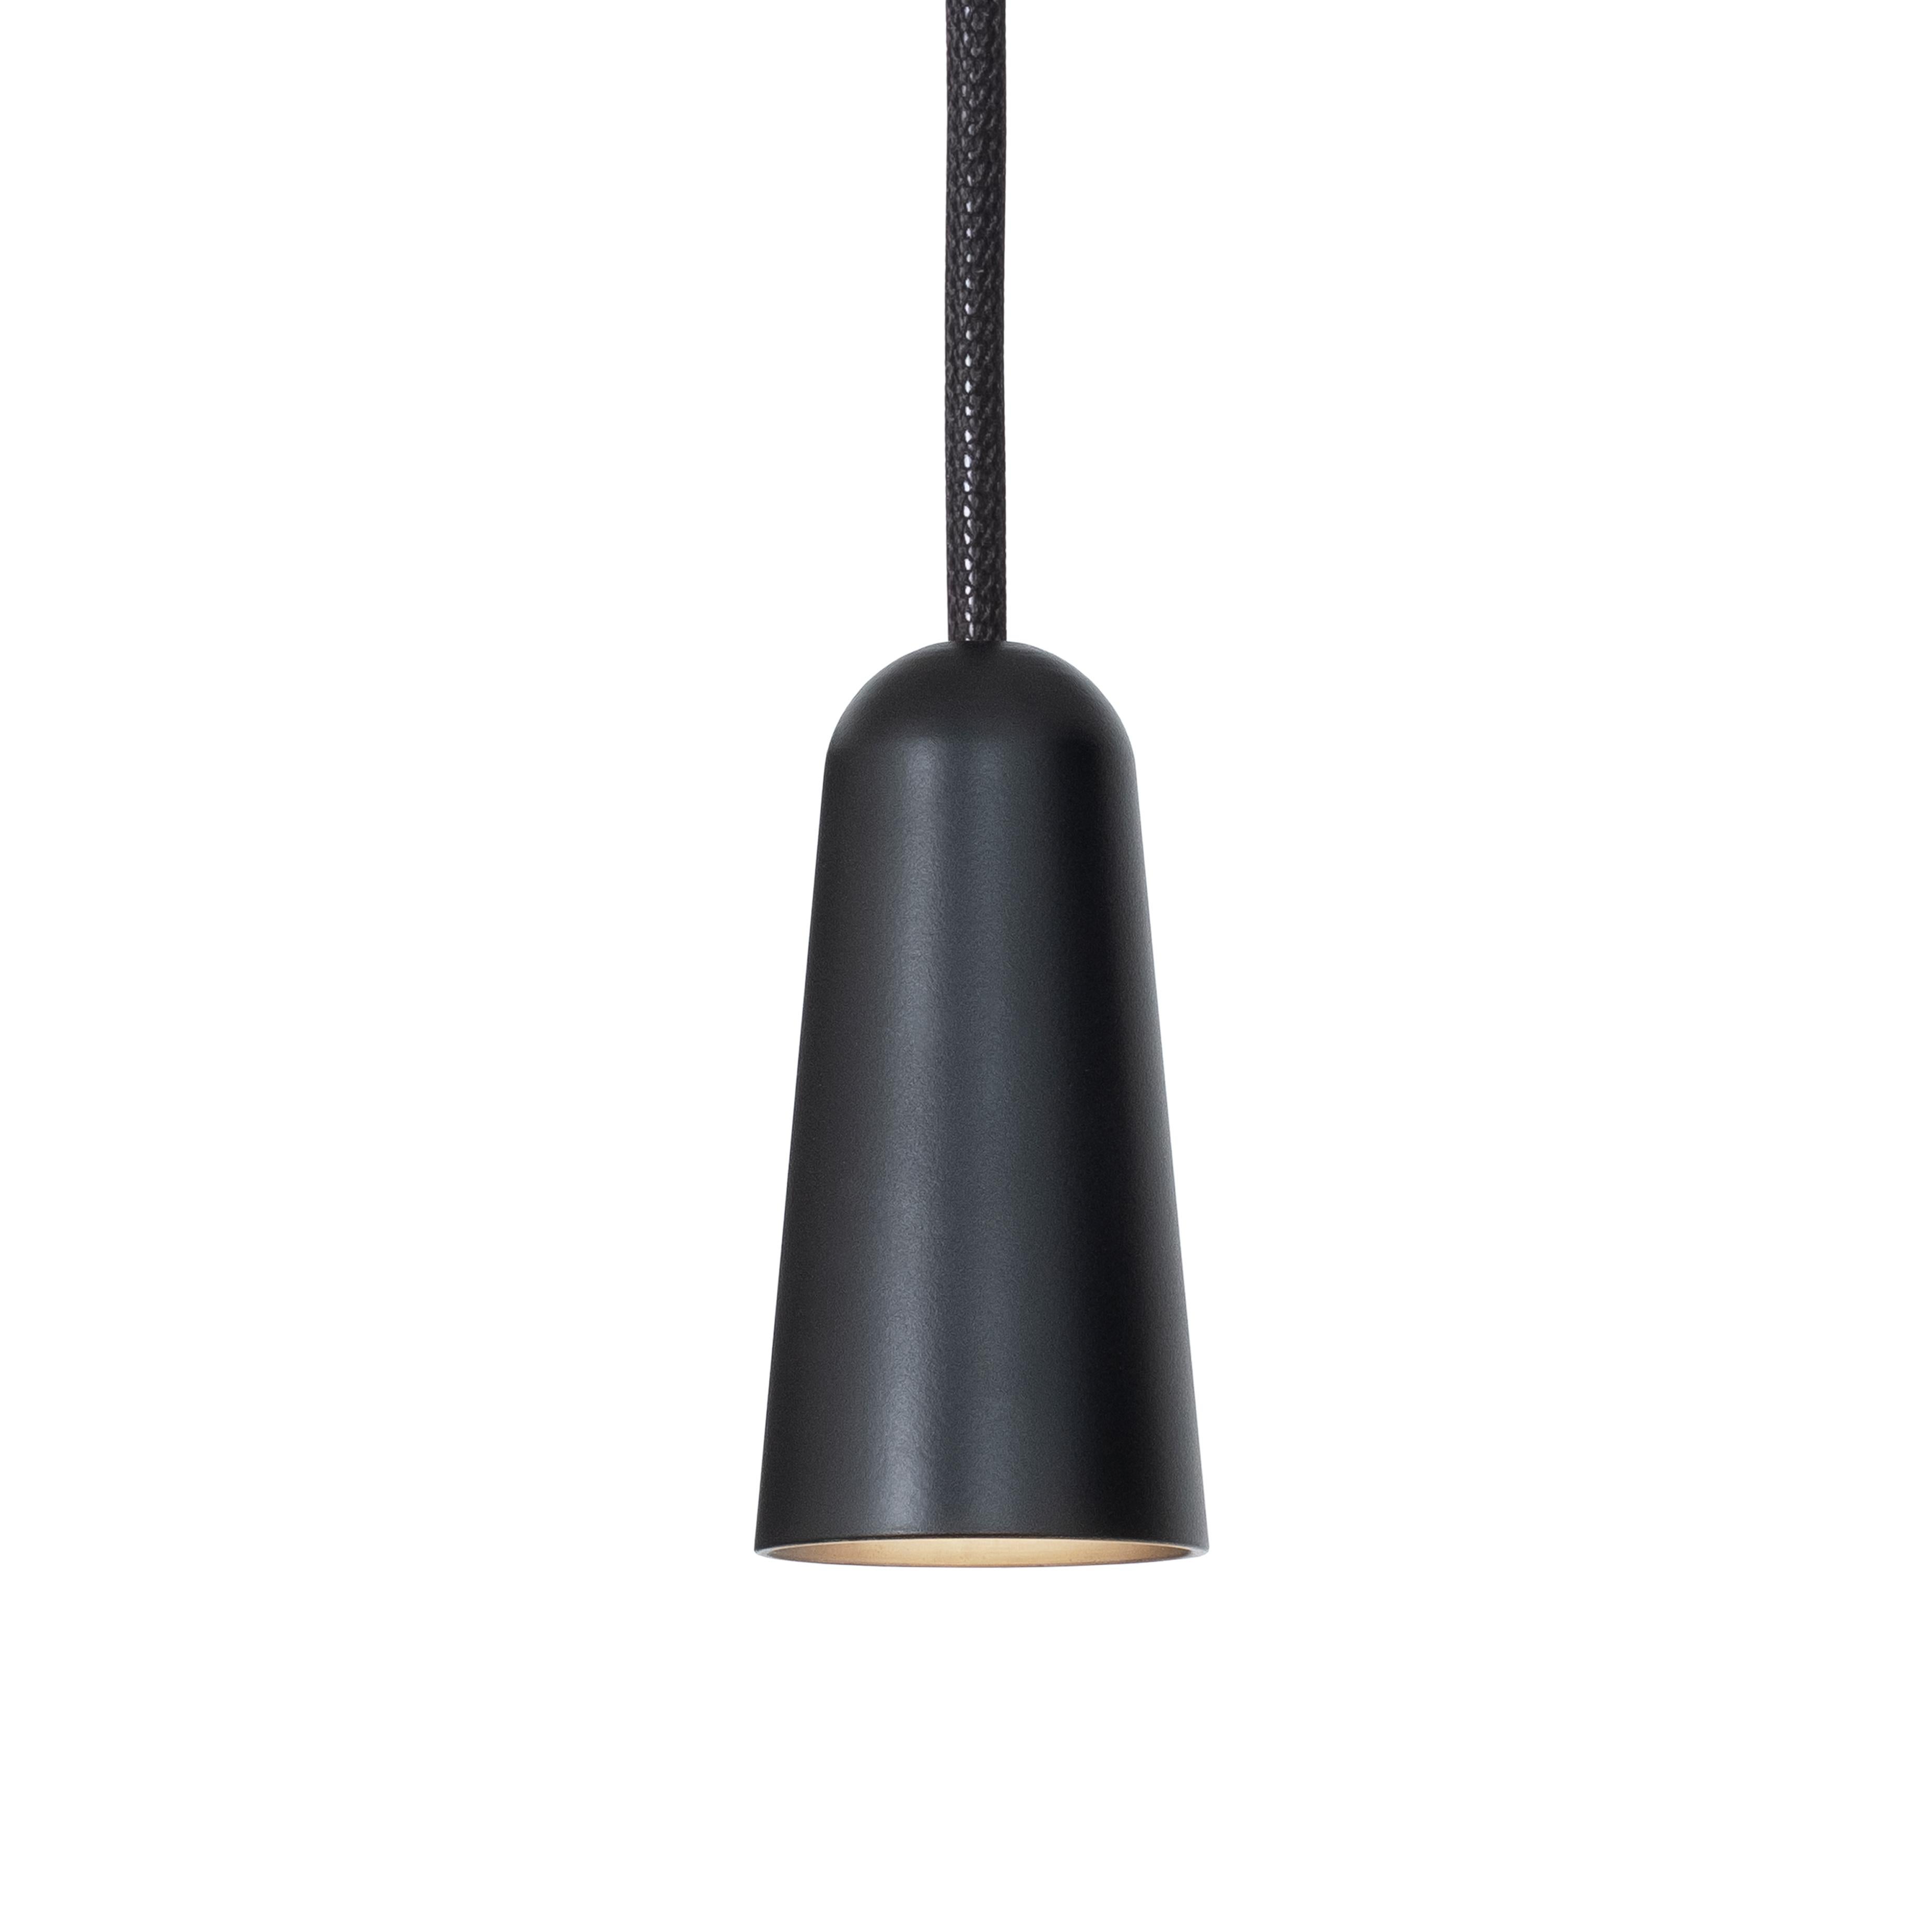 Set of five Ceiling lamp model 3493-8 Massiv Black EDT by Henrik Tengler and manufactured by Konsthantverk.

The production of lamps, wall lights and floor lamps are manufactured using craftsman’s techniques with the same materials and techniques as